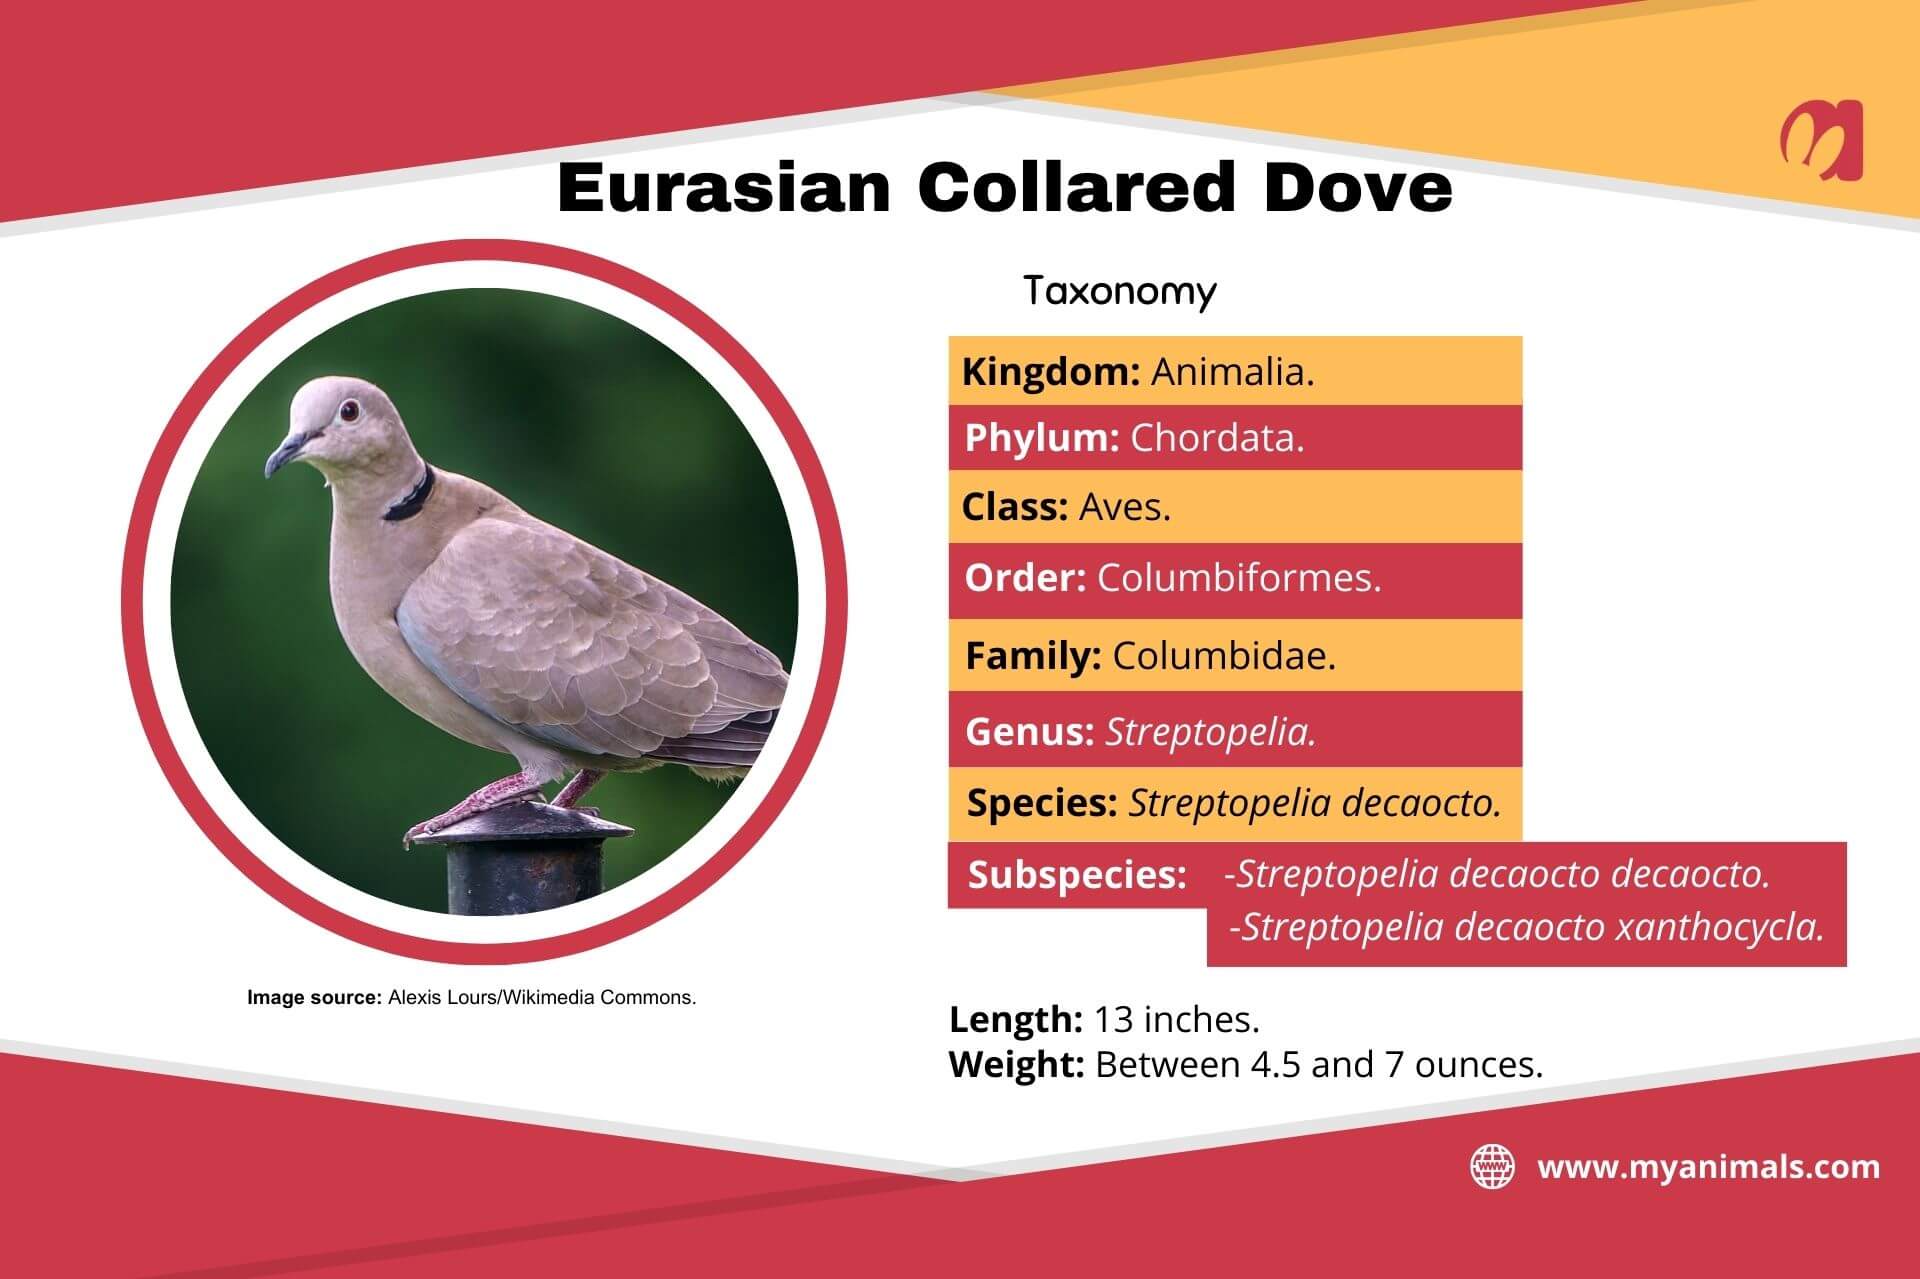 Information on the Eurasian collared dove.